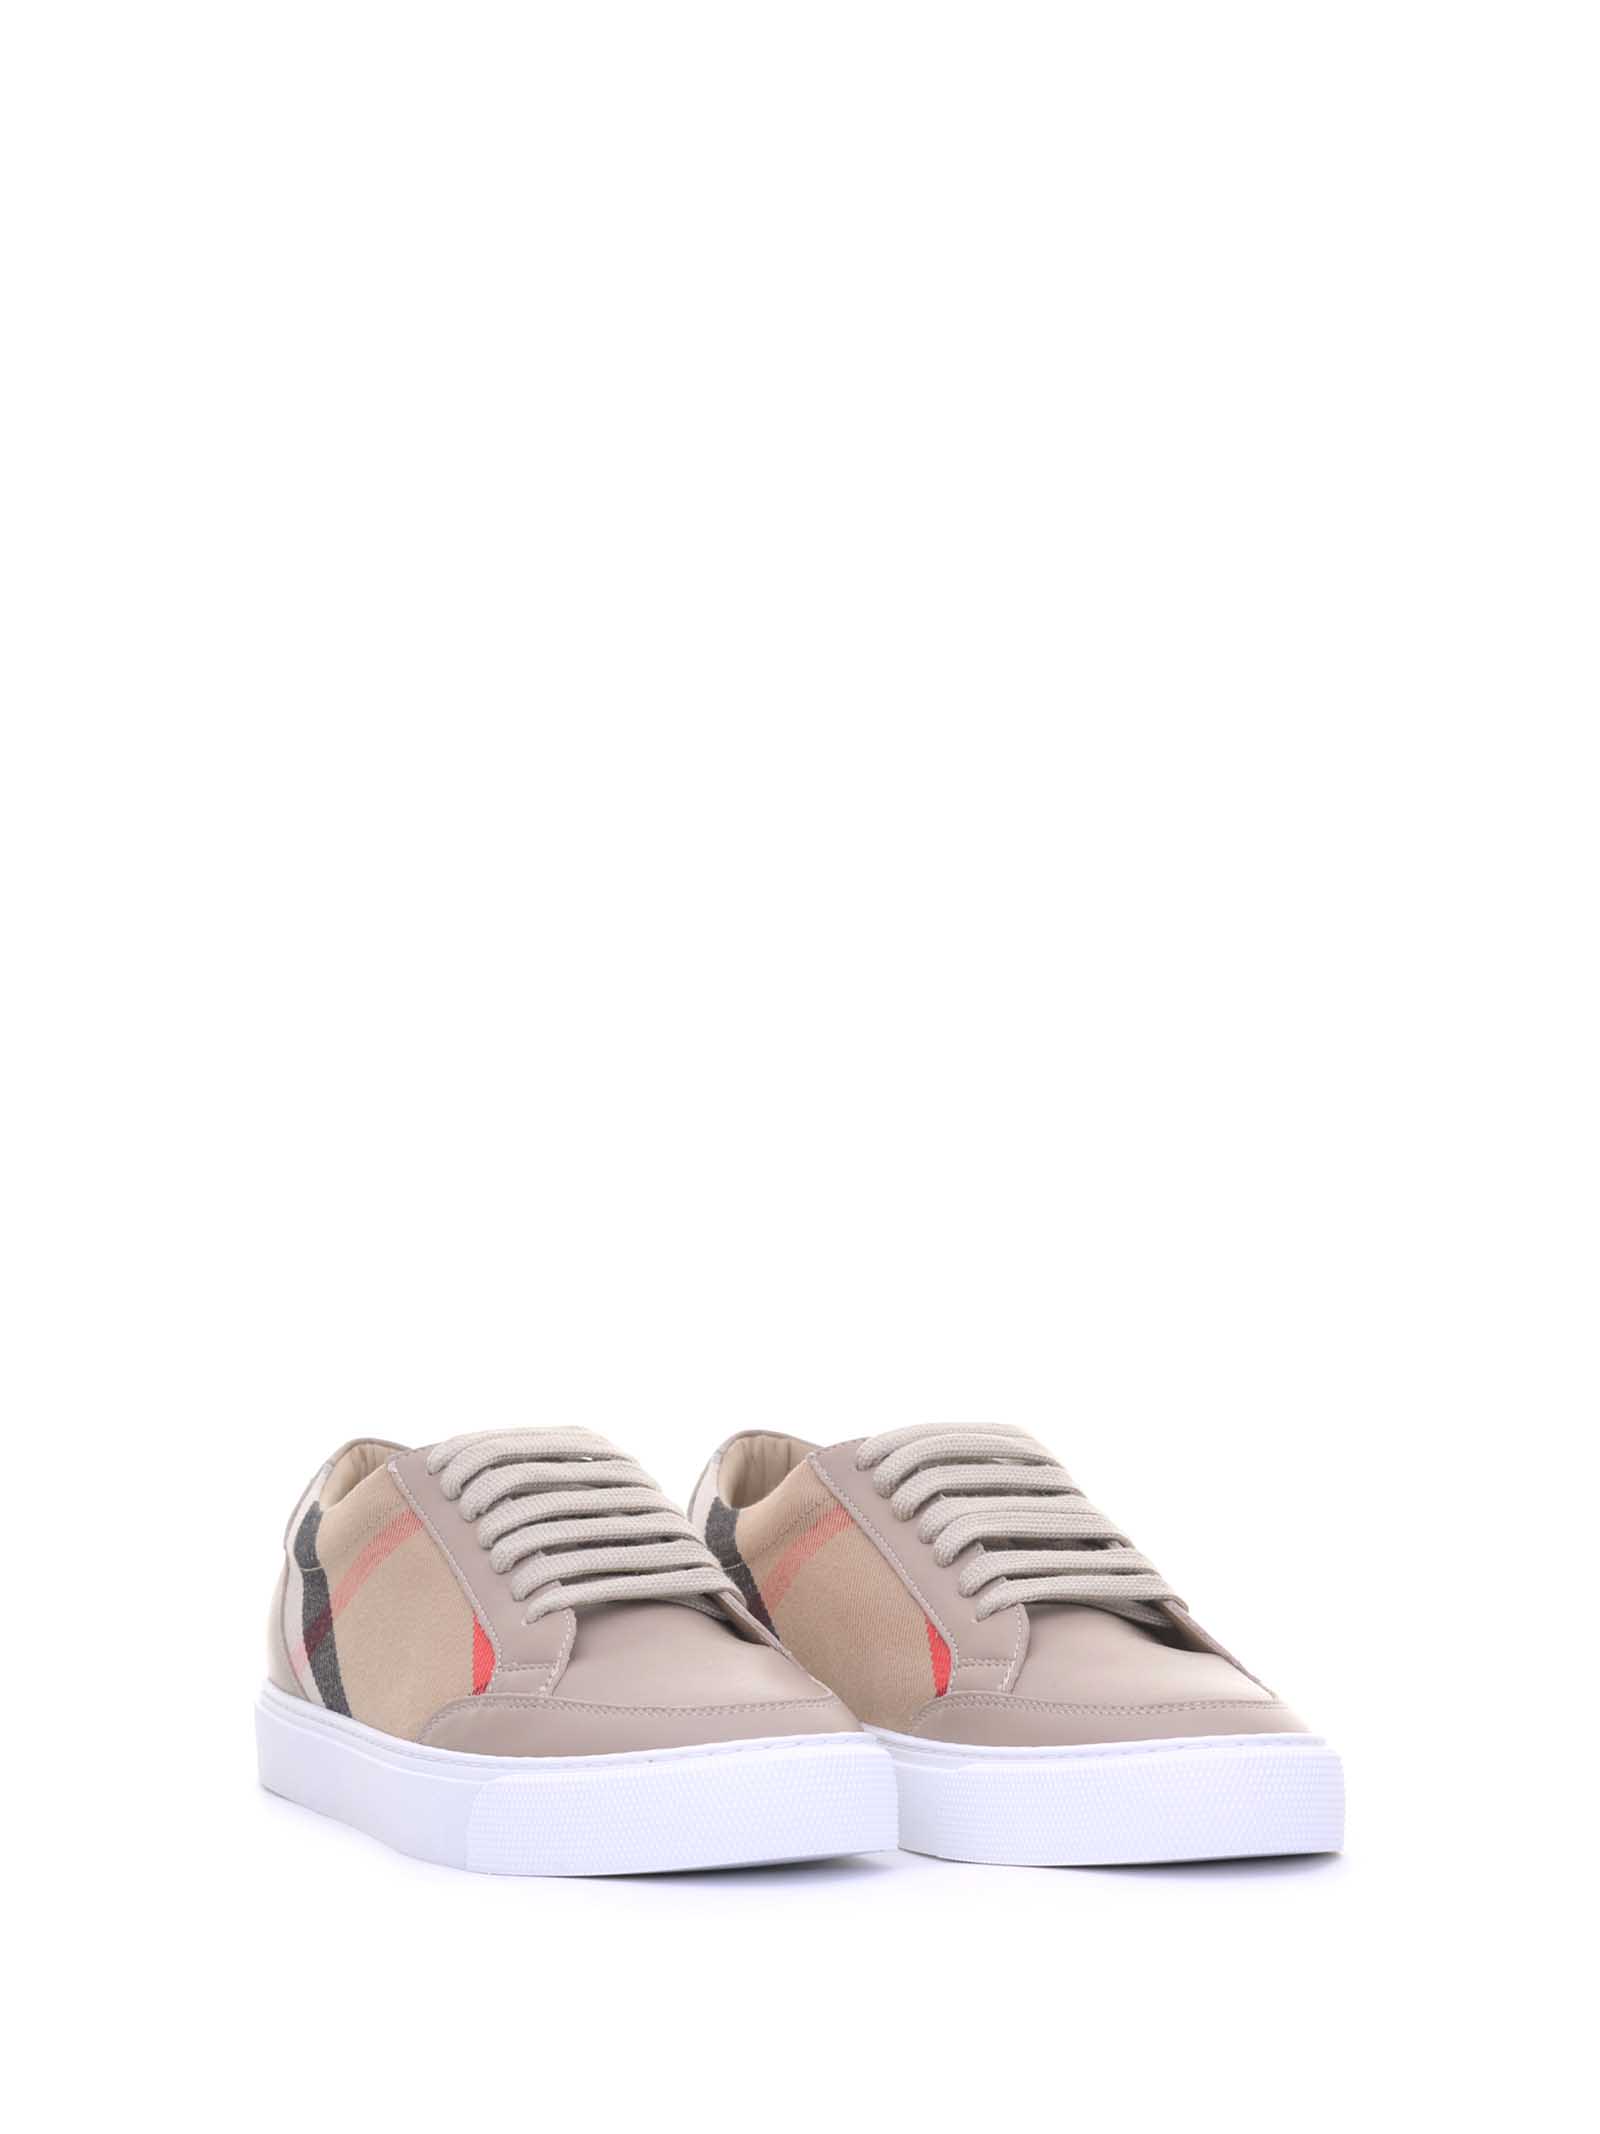 burberry house check sneakers